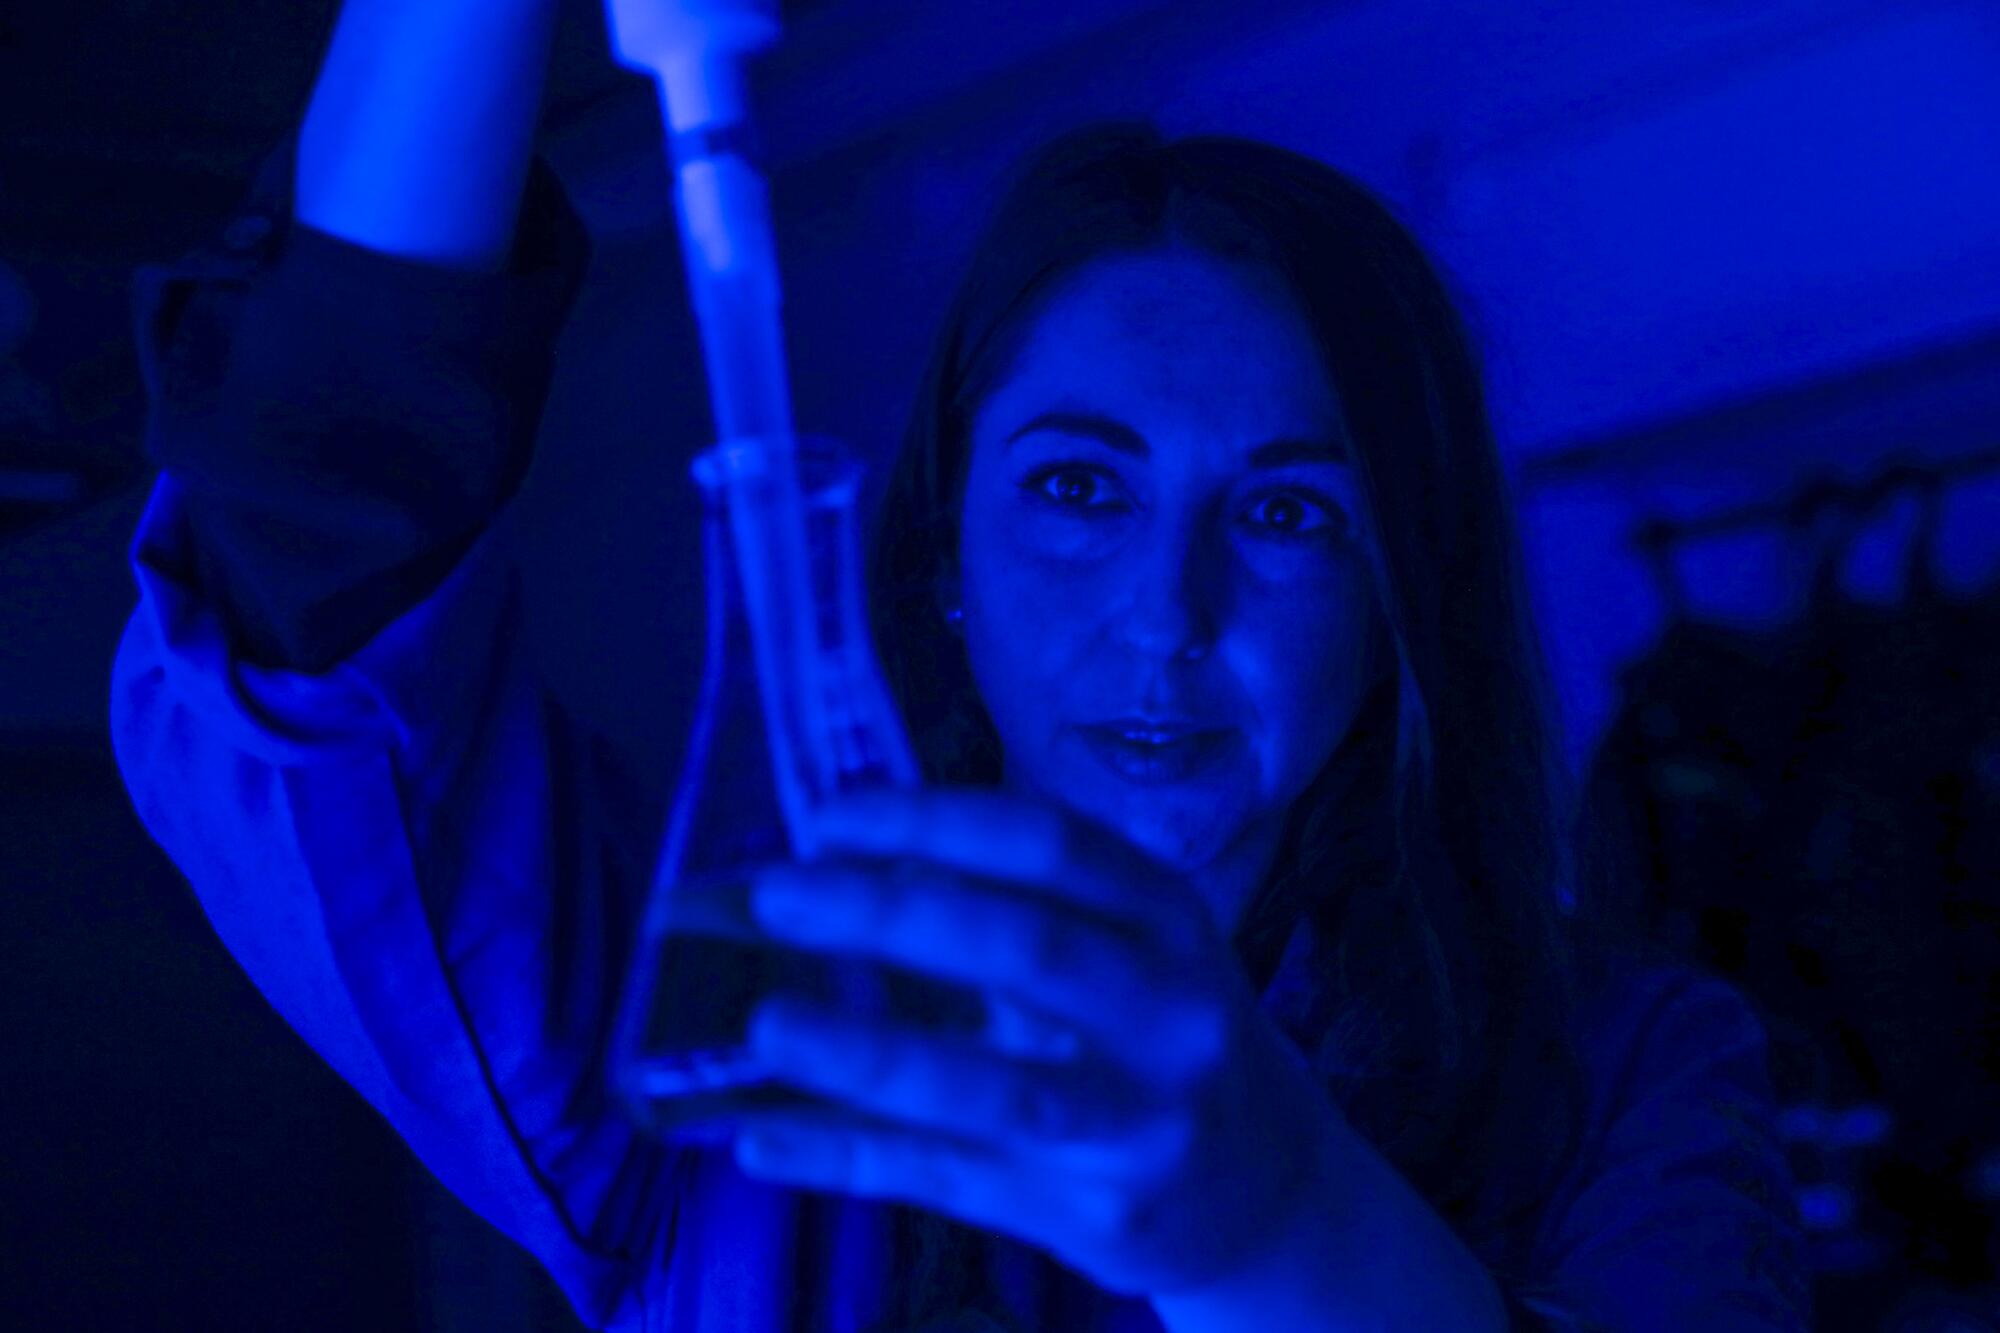 A woman bathed in blue light manipulates laboratory equipment